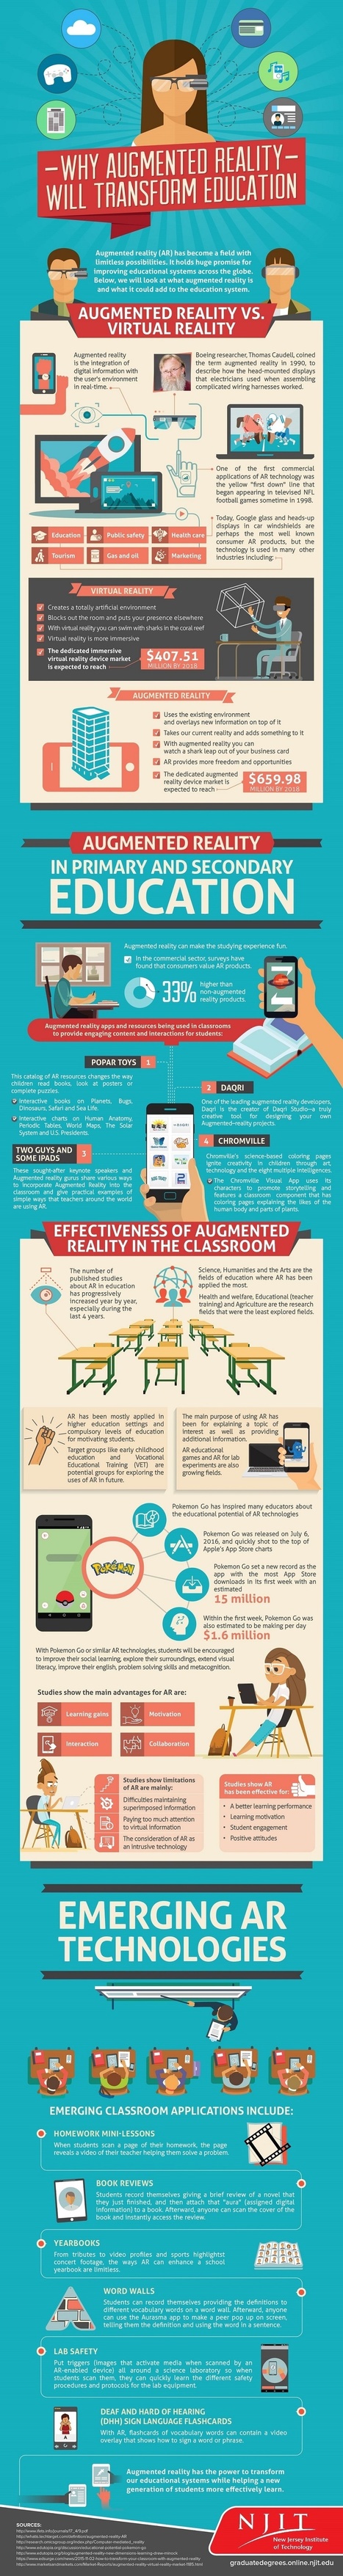 Why Augmented Reality Will Transform Education Infographic - e-Learning Infographics | Apprenance transmédia § Formations | Scoop.it